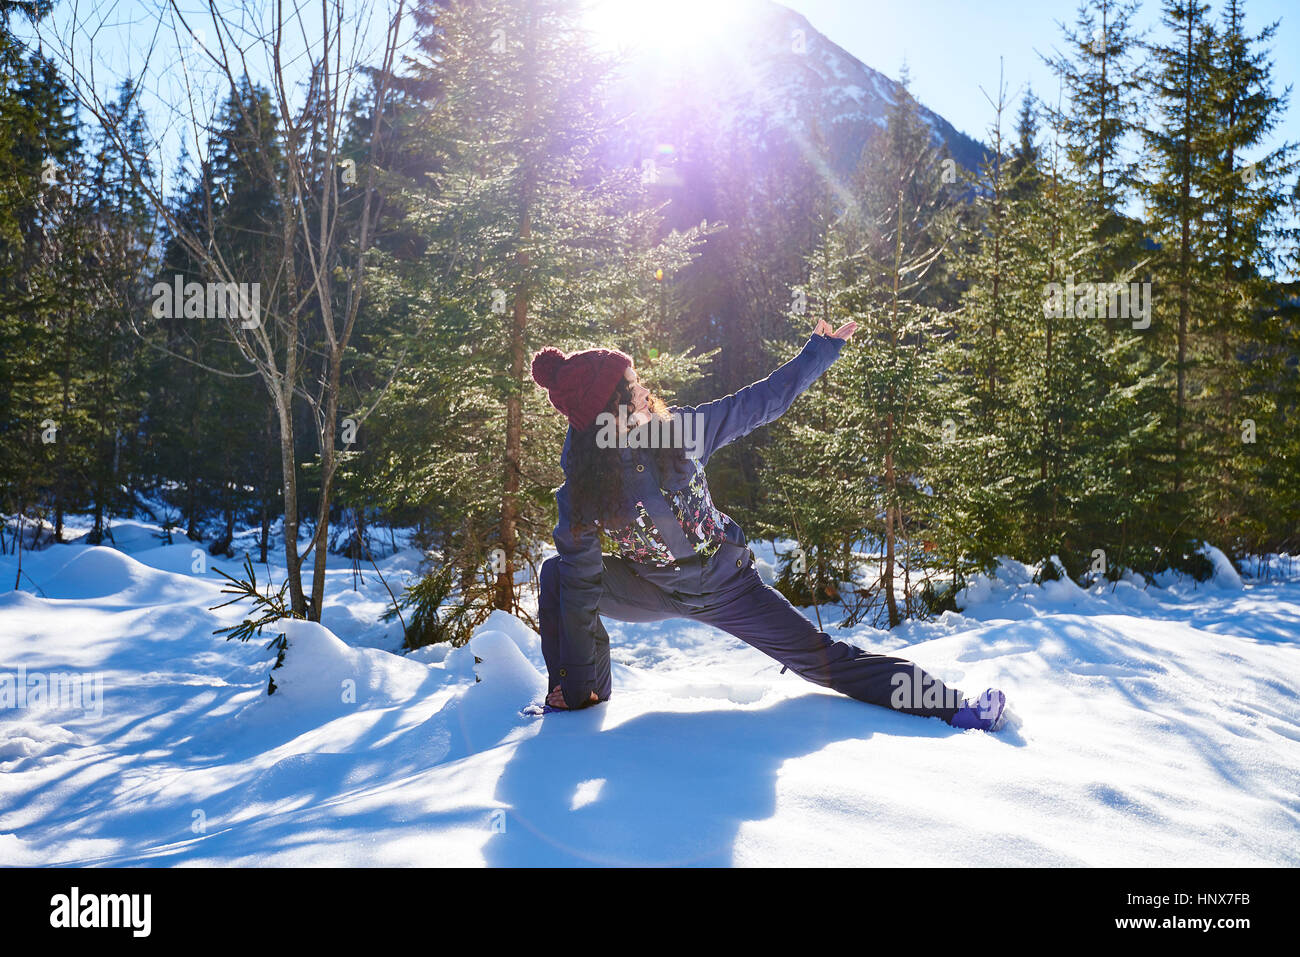 Woman in winter clothes practicing side angle yoga pose in snowy forest, Austria Stock Photo